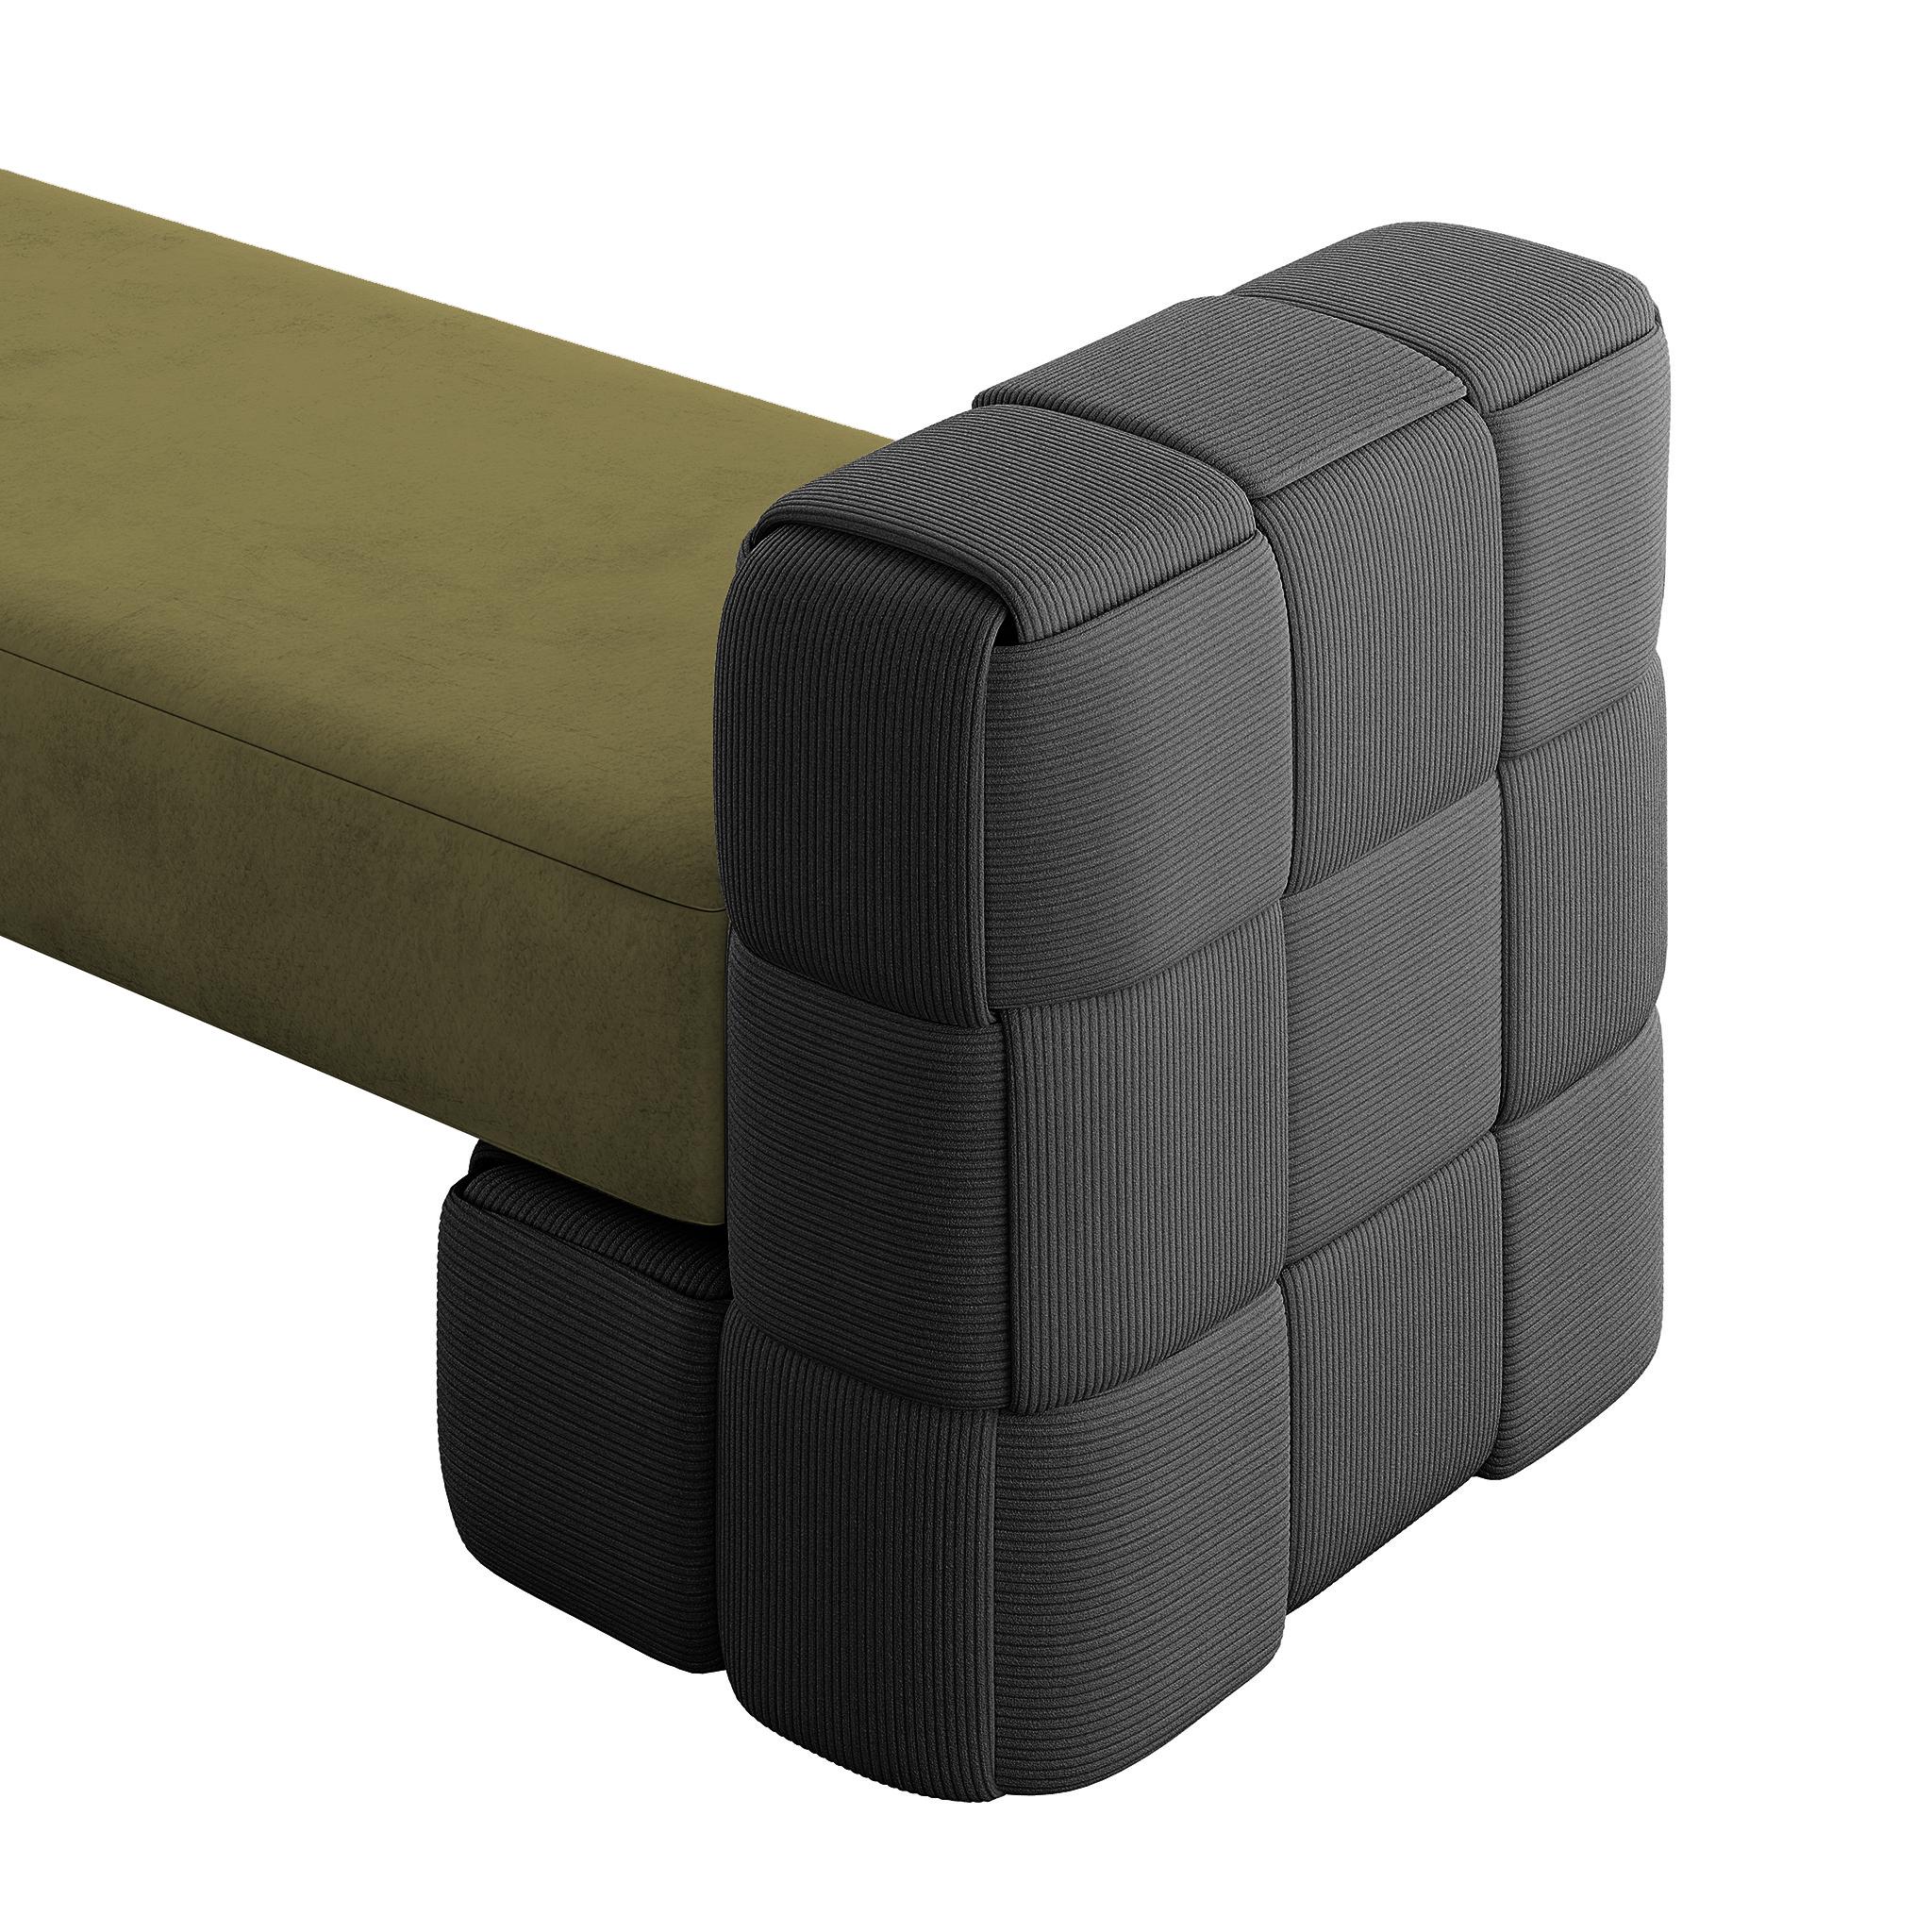 Organic Modern Contemporary Woven Upholstered Bench Forest Green Suede & Arms Black Corduroy For Sale